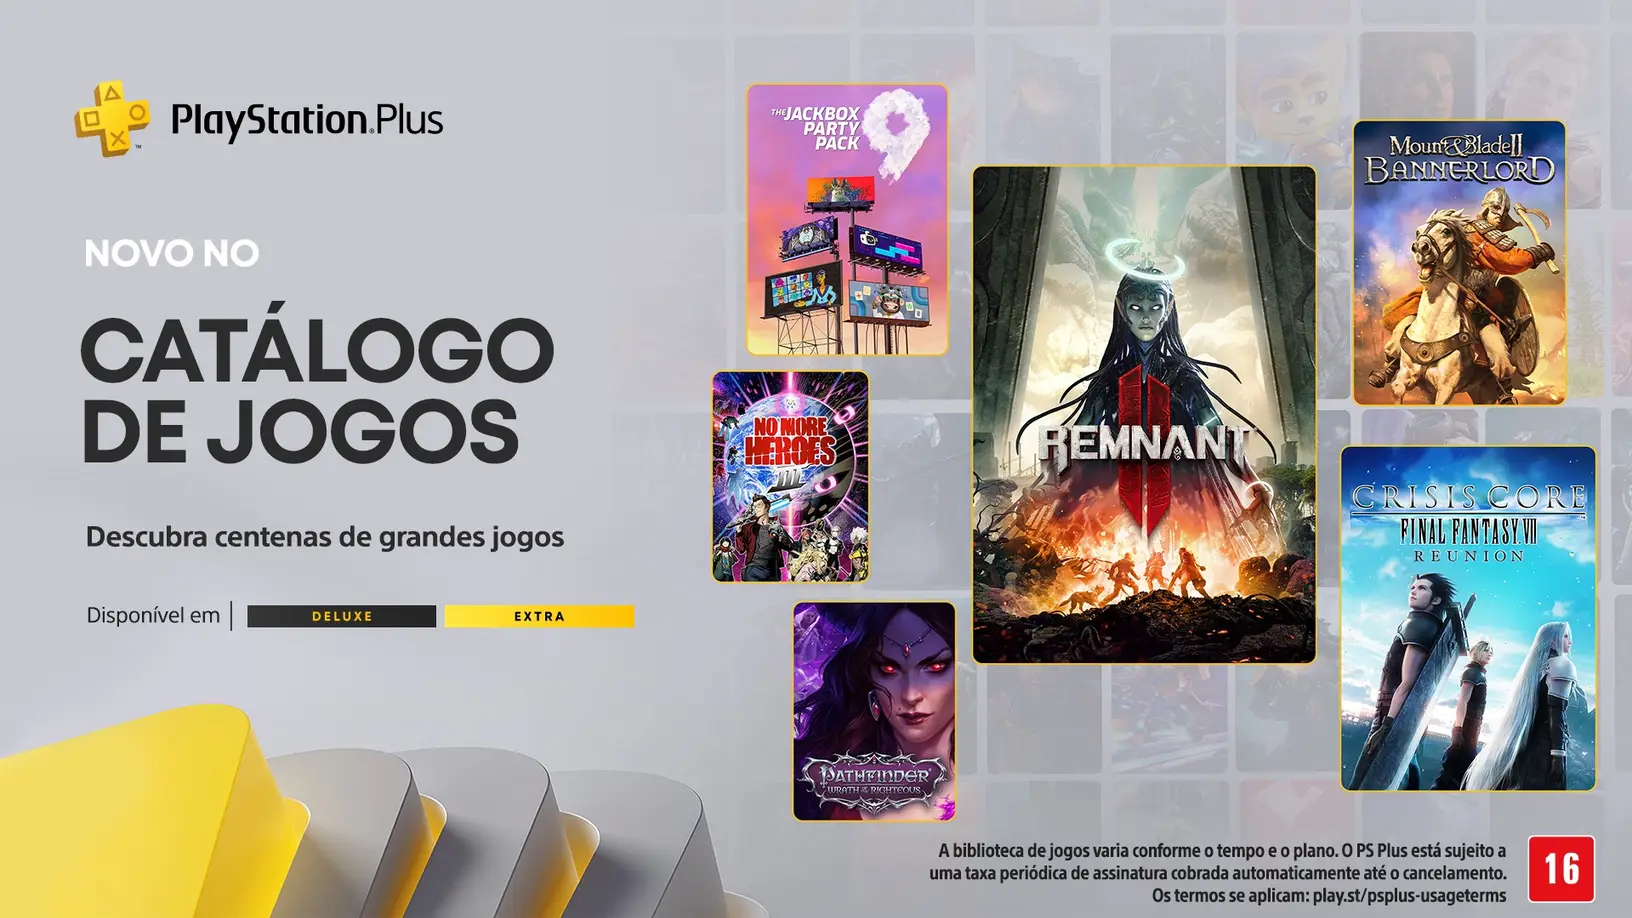 Check out the PlayStation Plus Games Catalogue for July